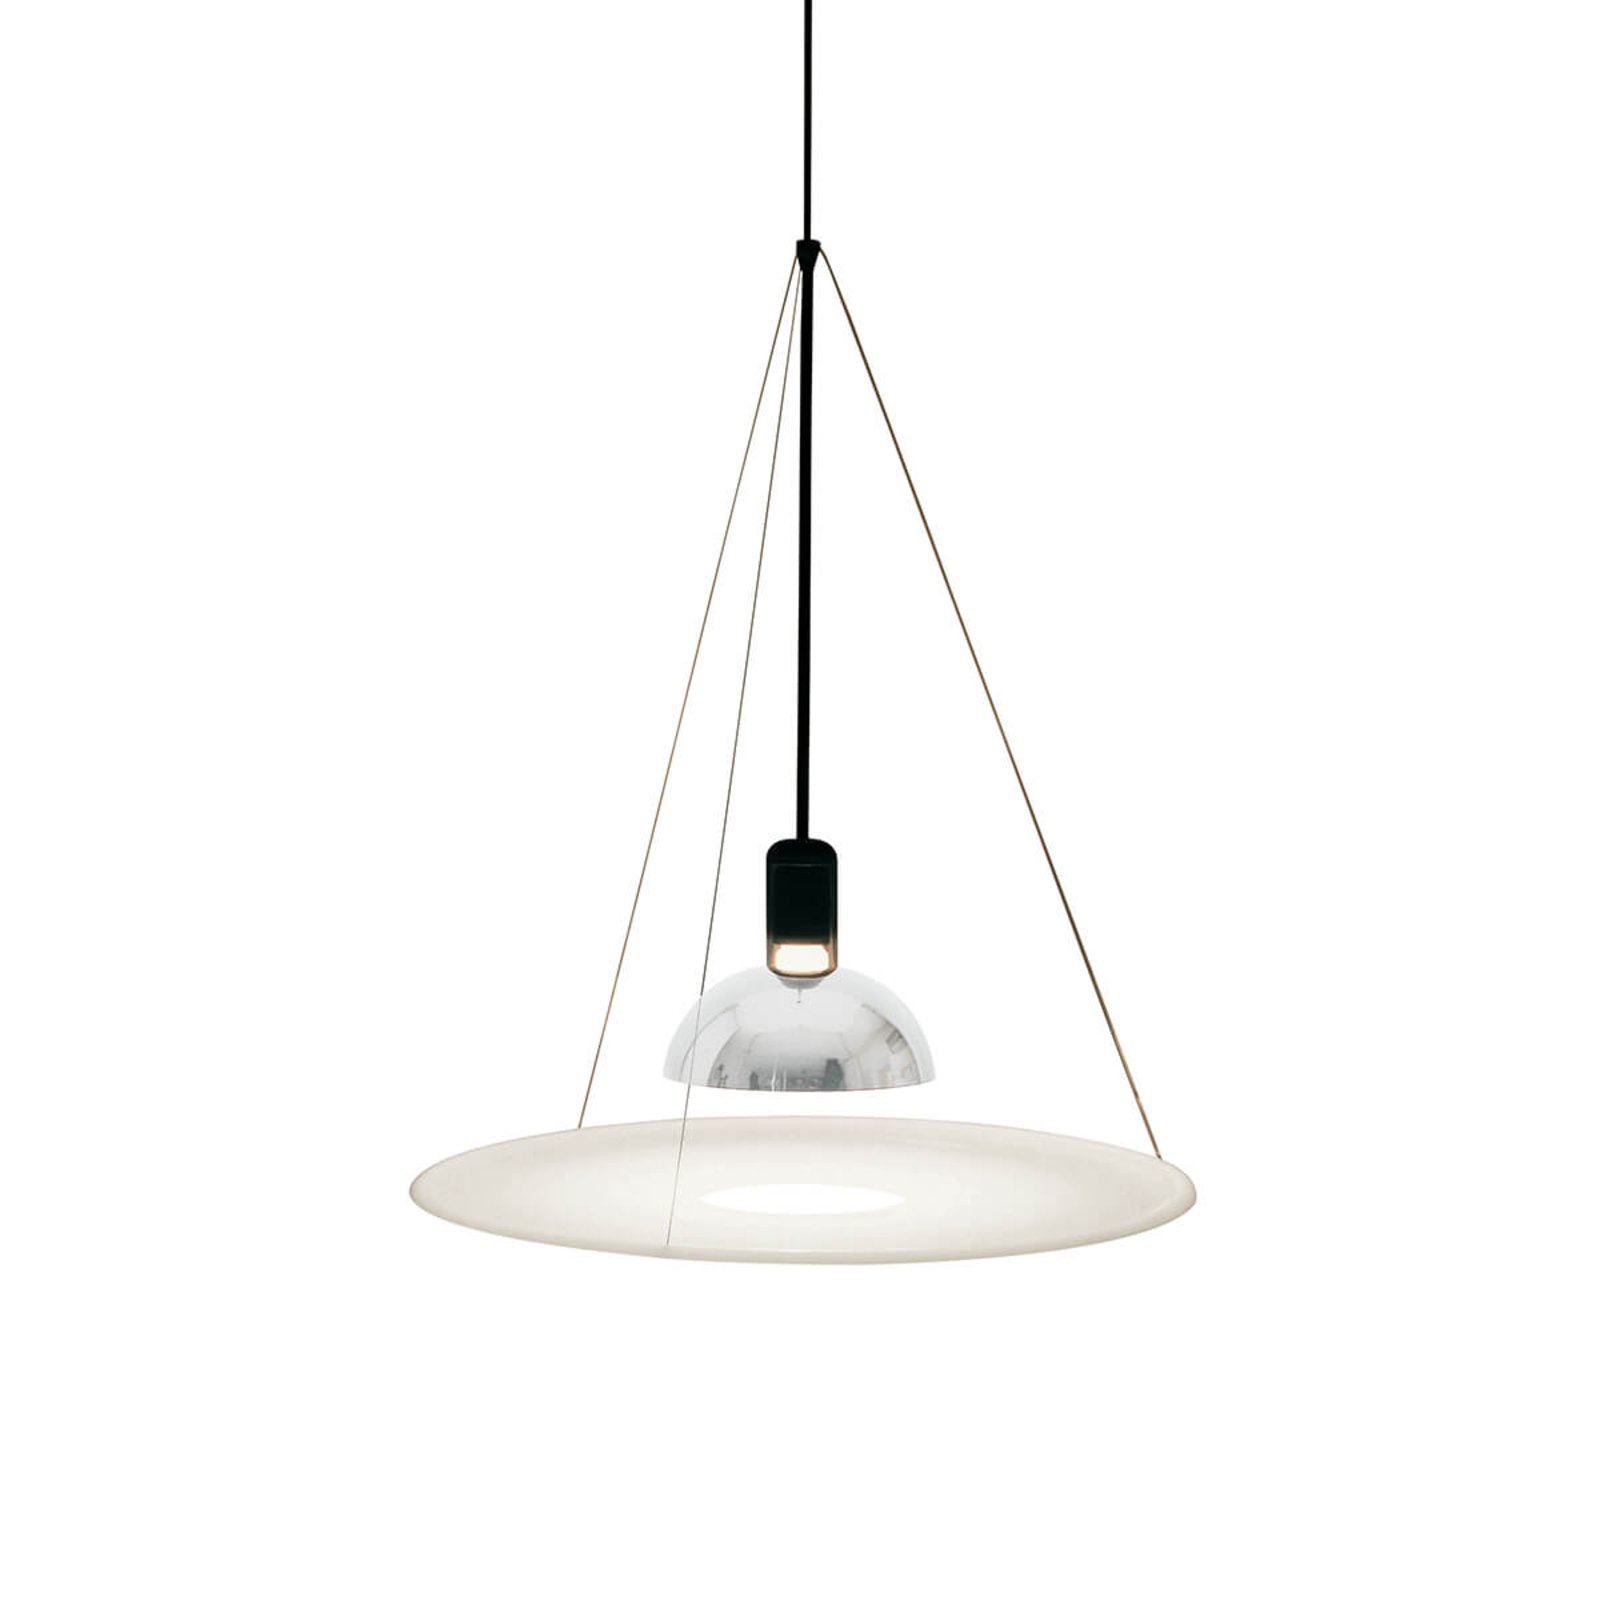 FLOS Frisbi hanging light with a white disc